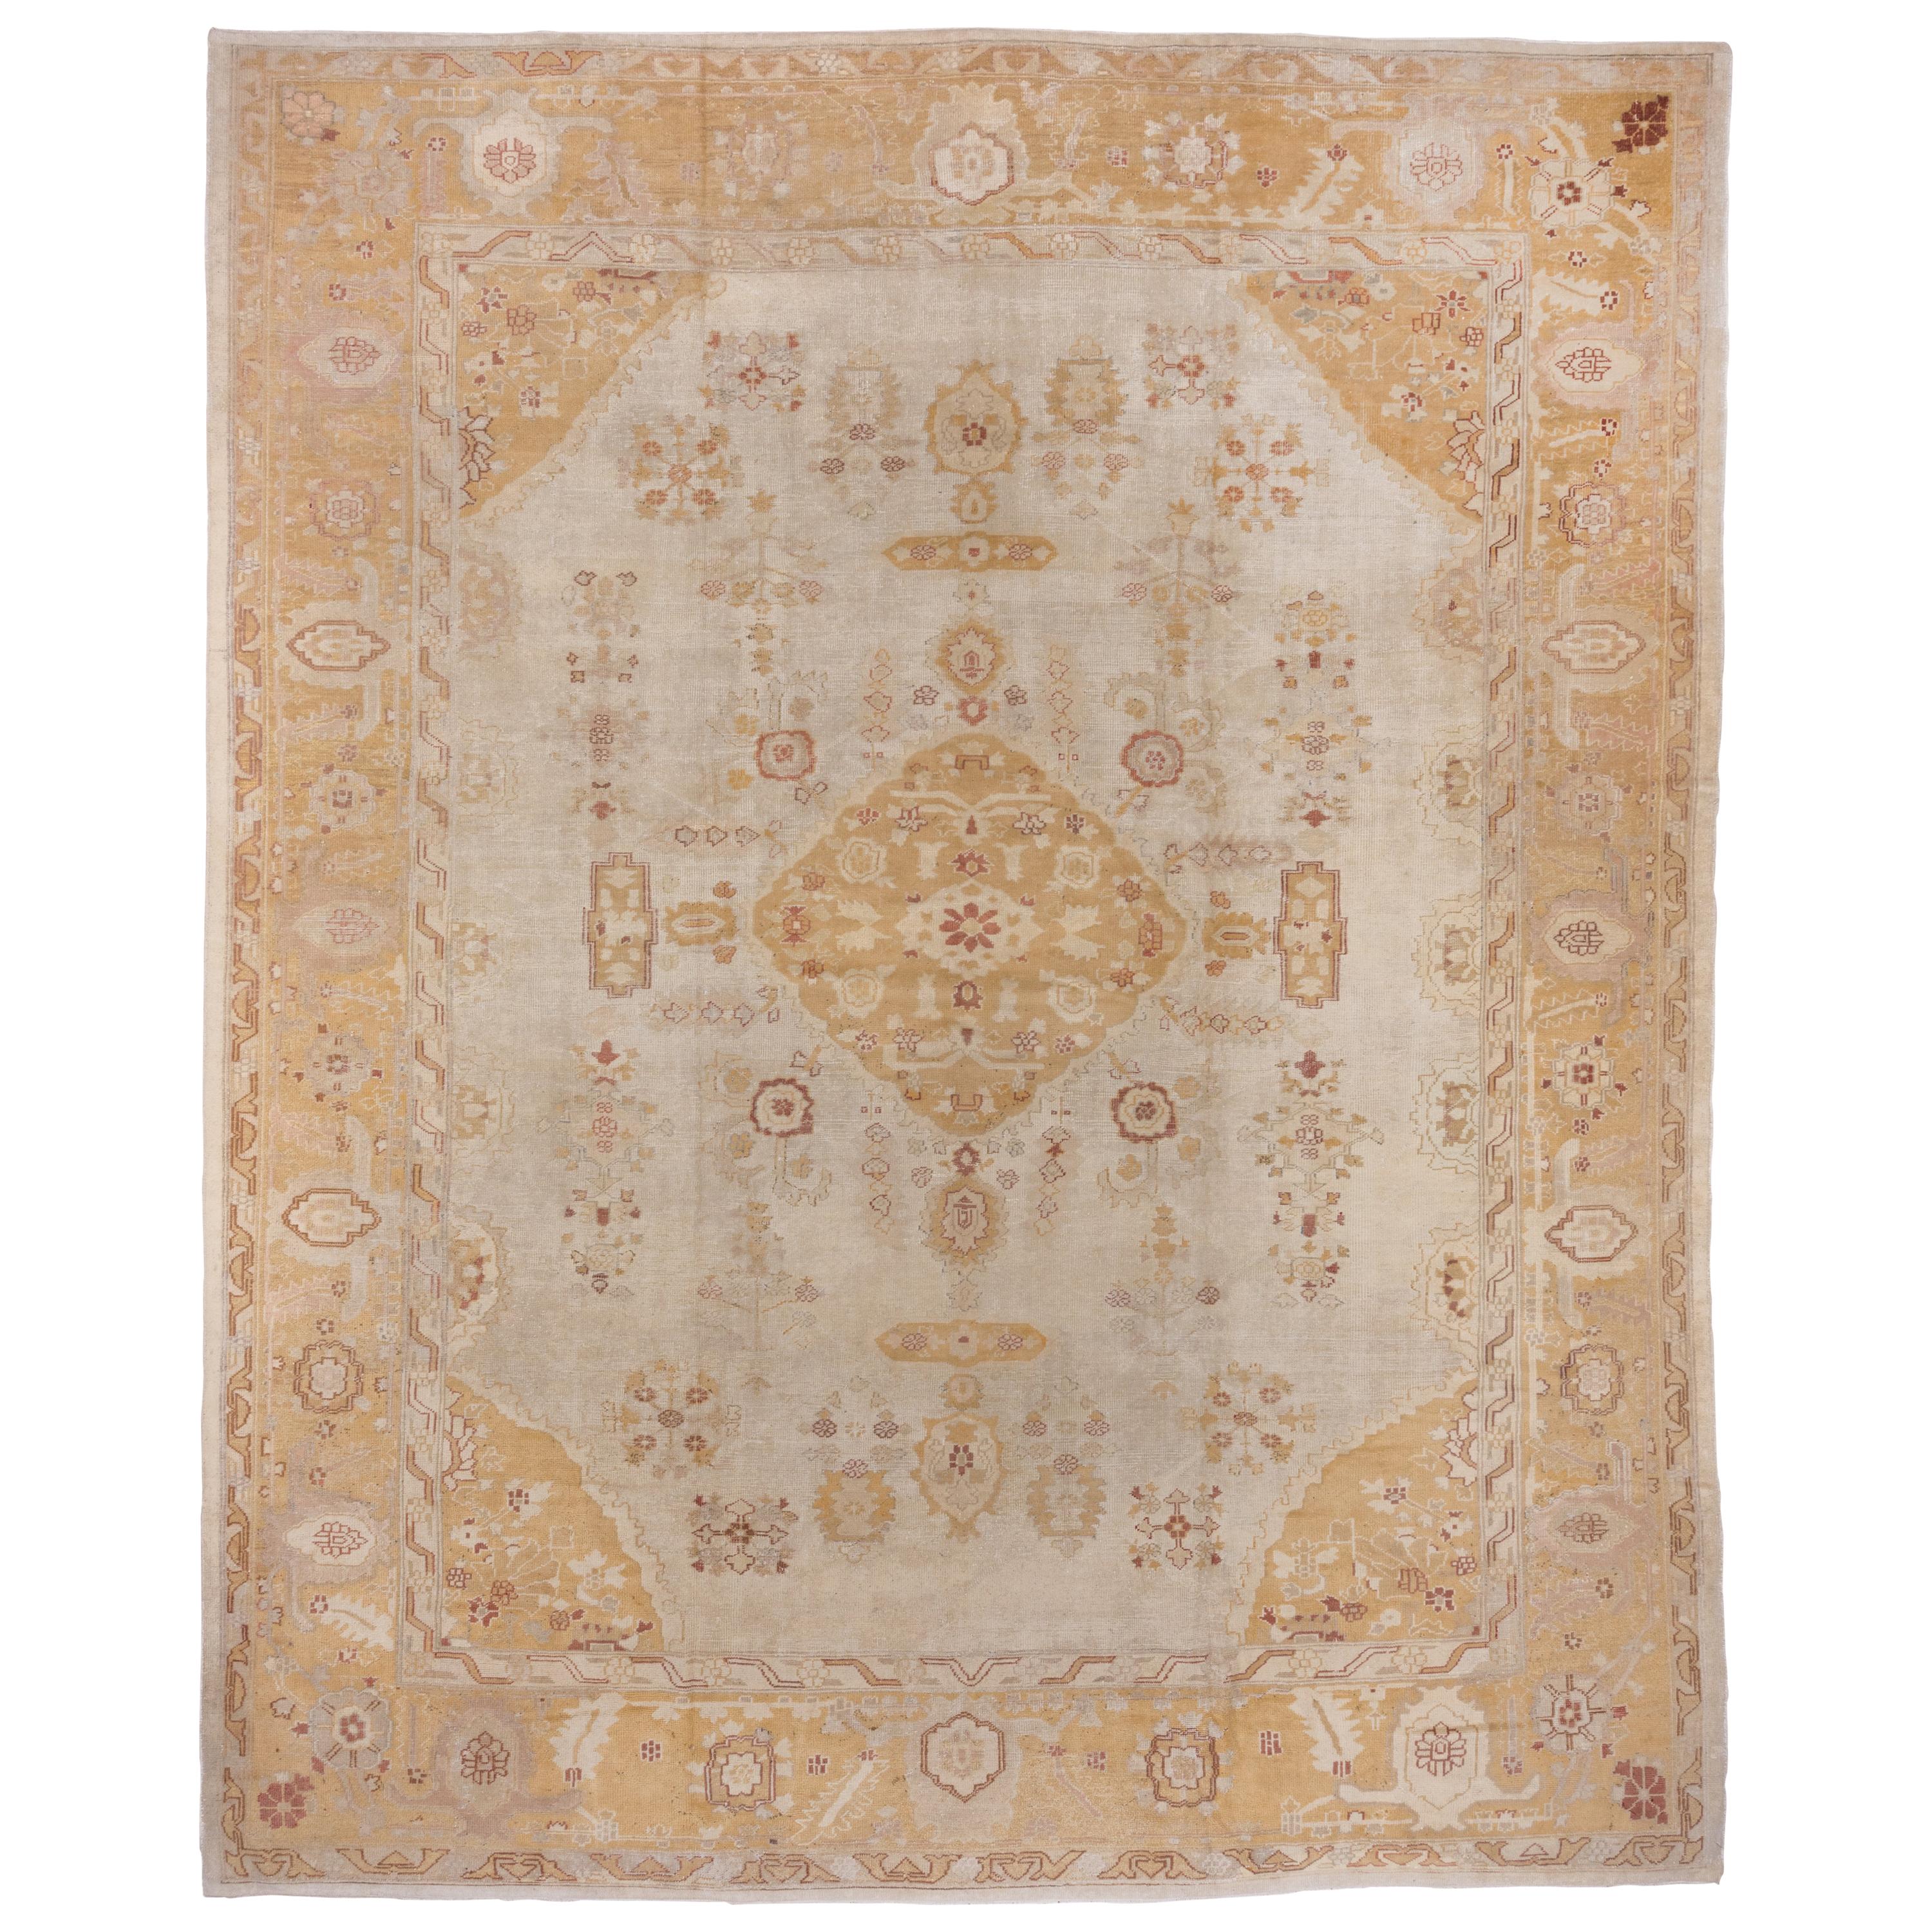 Antique Turkish Oushak Mansion Rug, Light Beige Field, Yellow Gold Borders For Sale